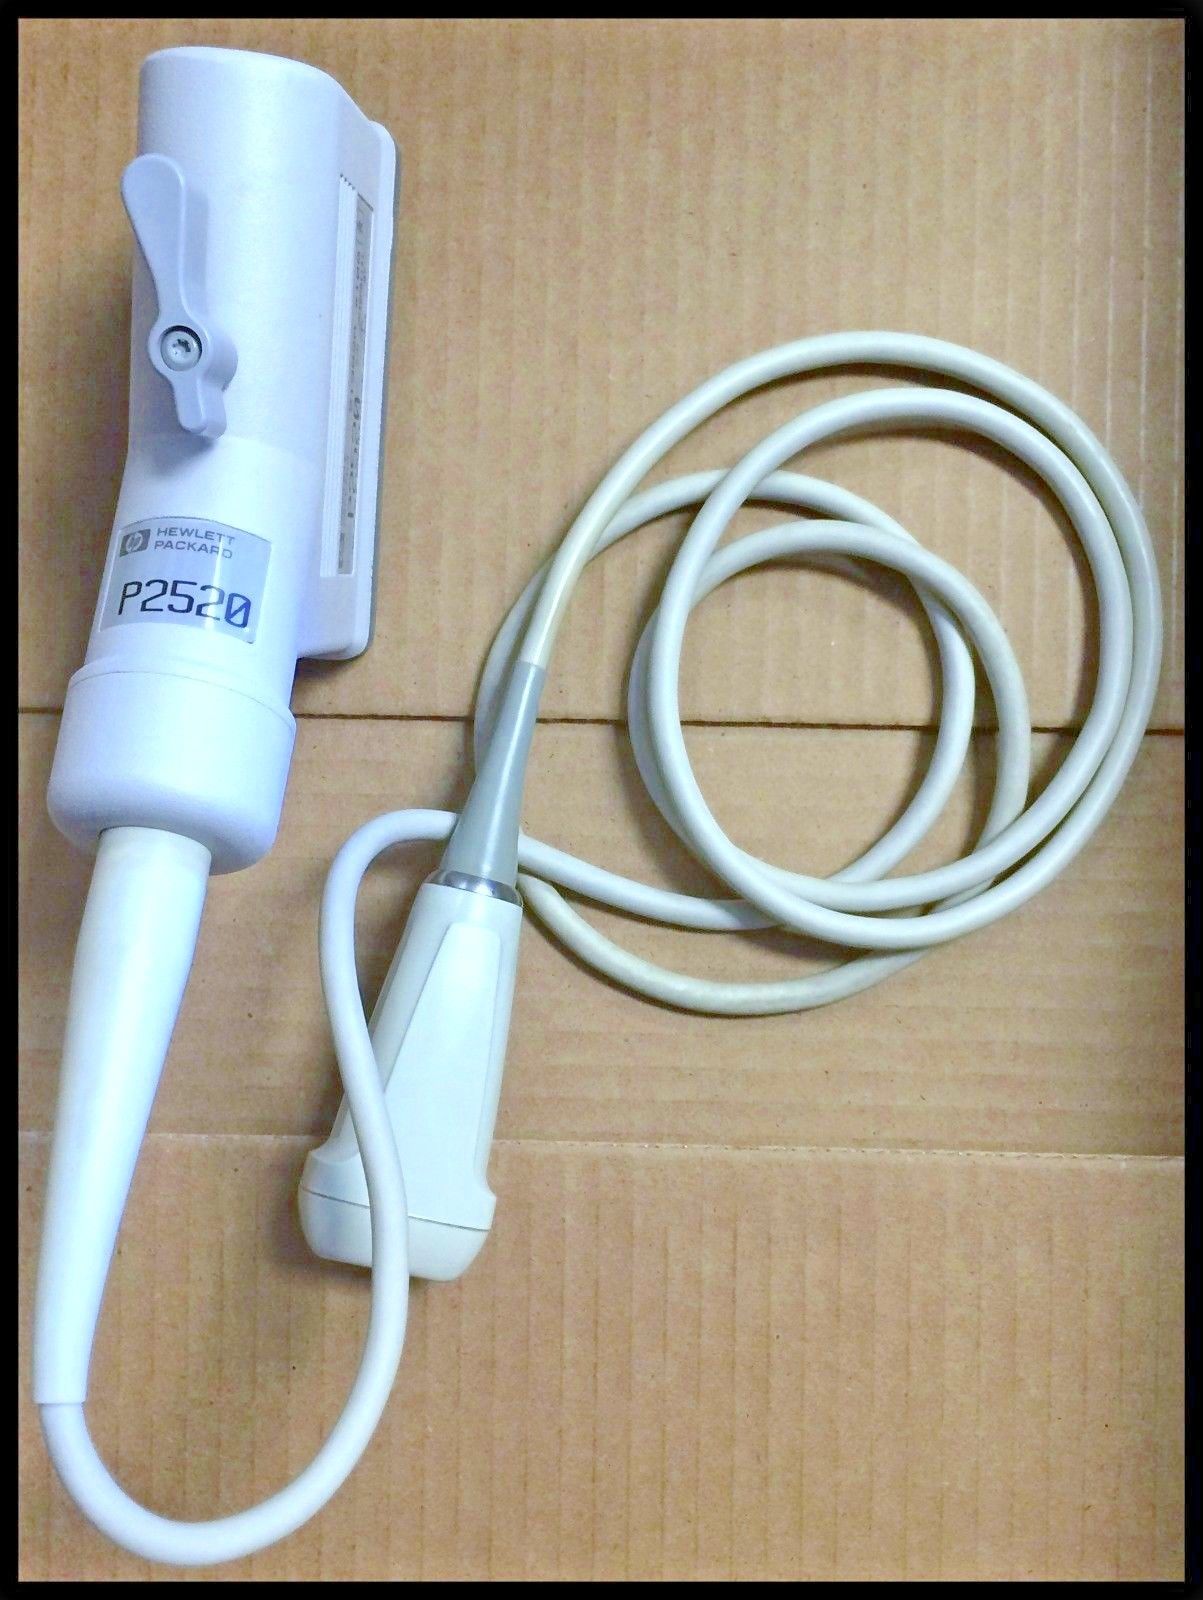 Philips (HP) 21302A / P2520 Phased Array Ultrasound Transducer Probe DIAGNOSTIC ULTRASOUND MACHINES FOR SALE